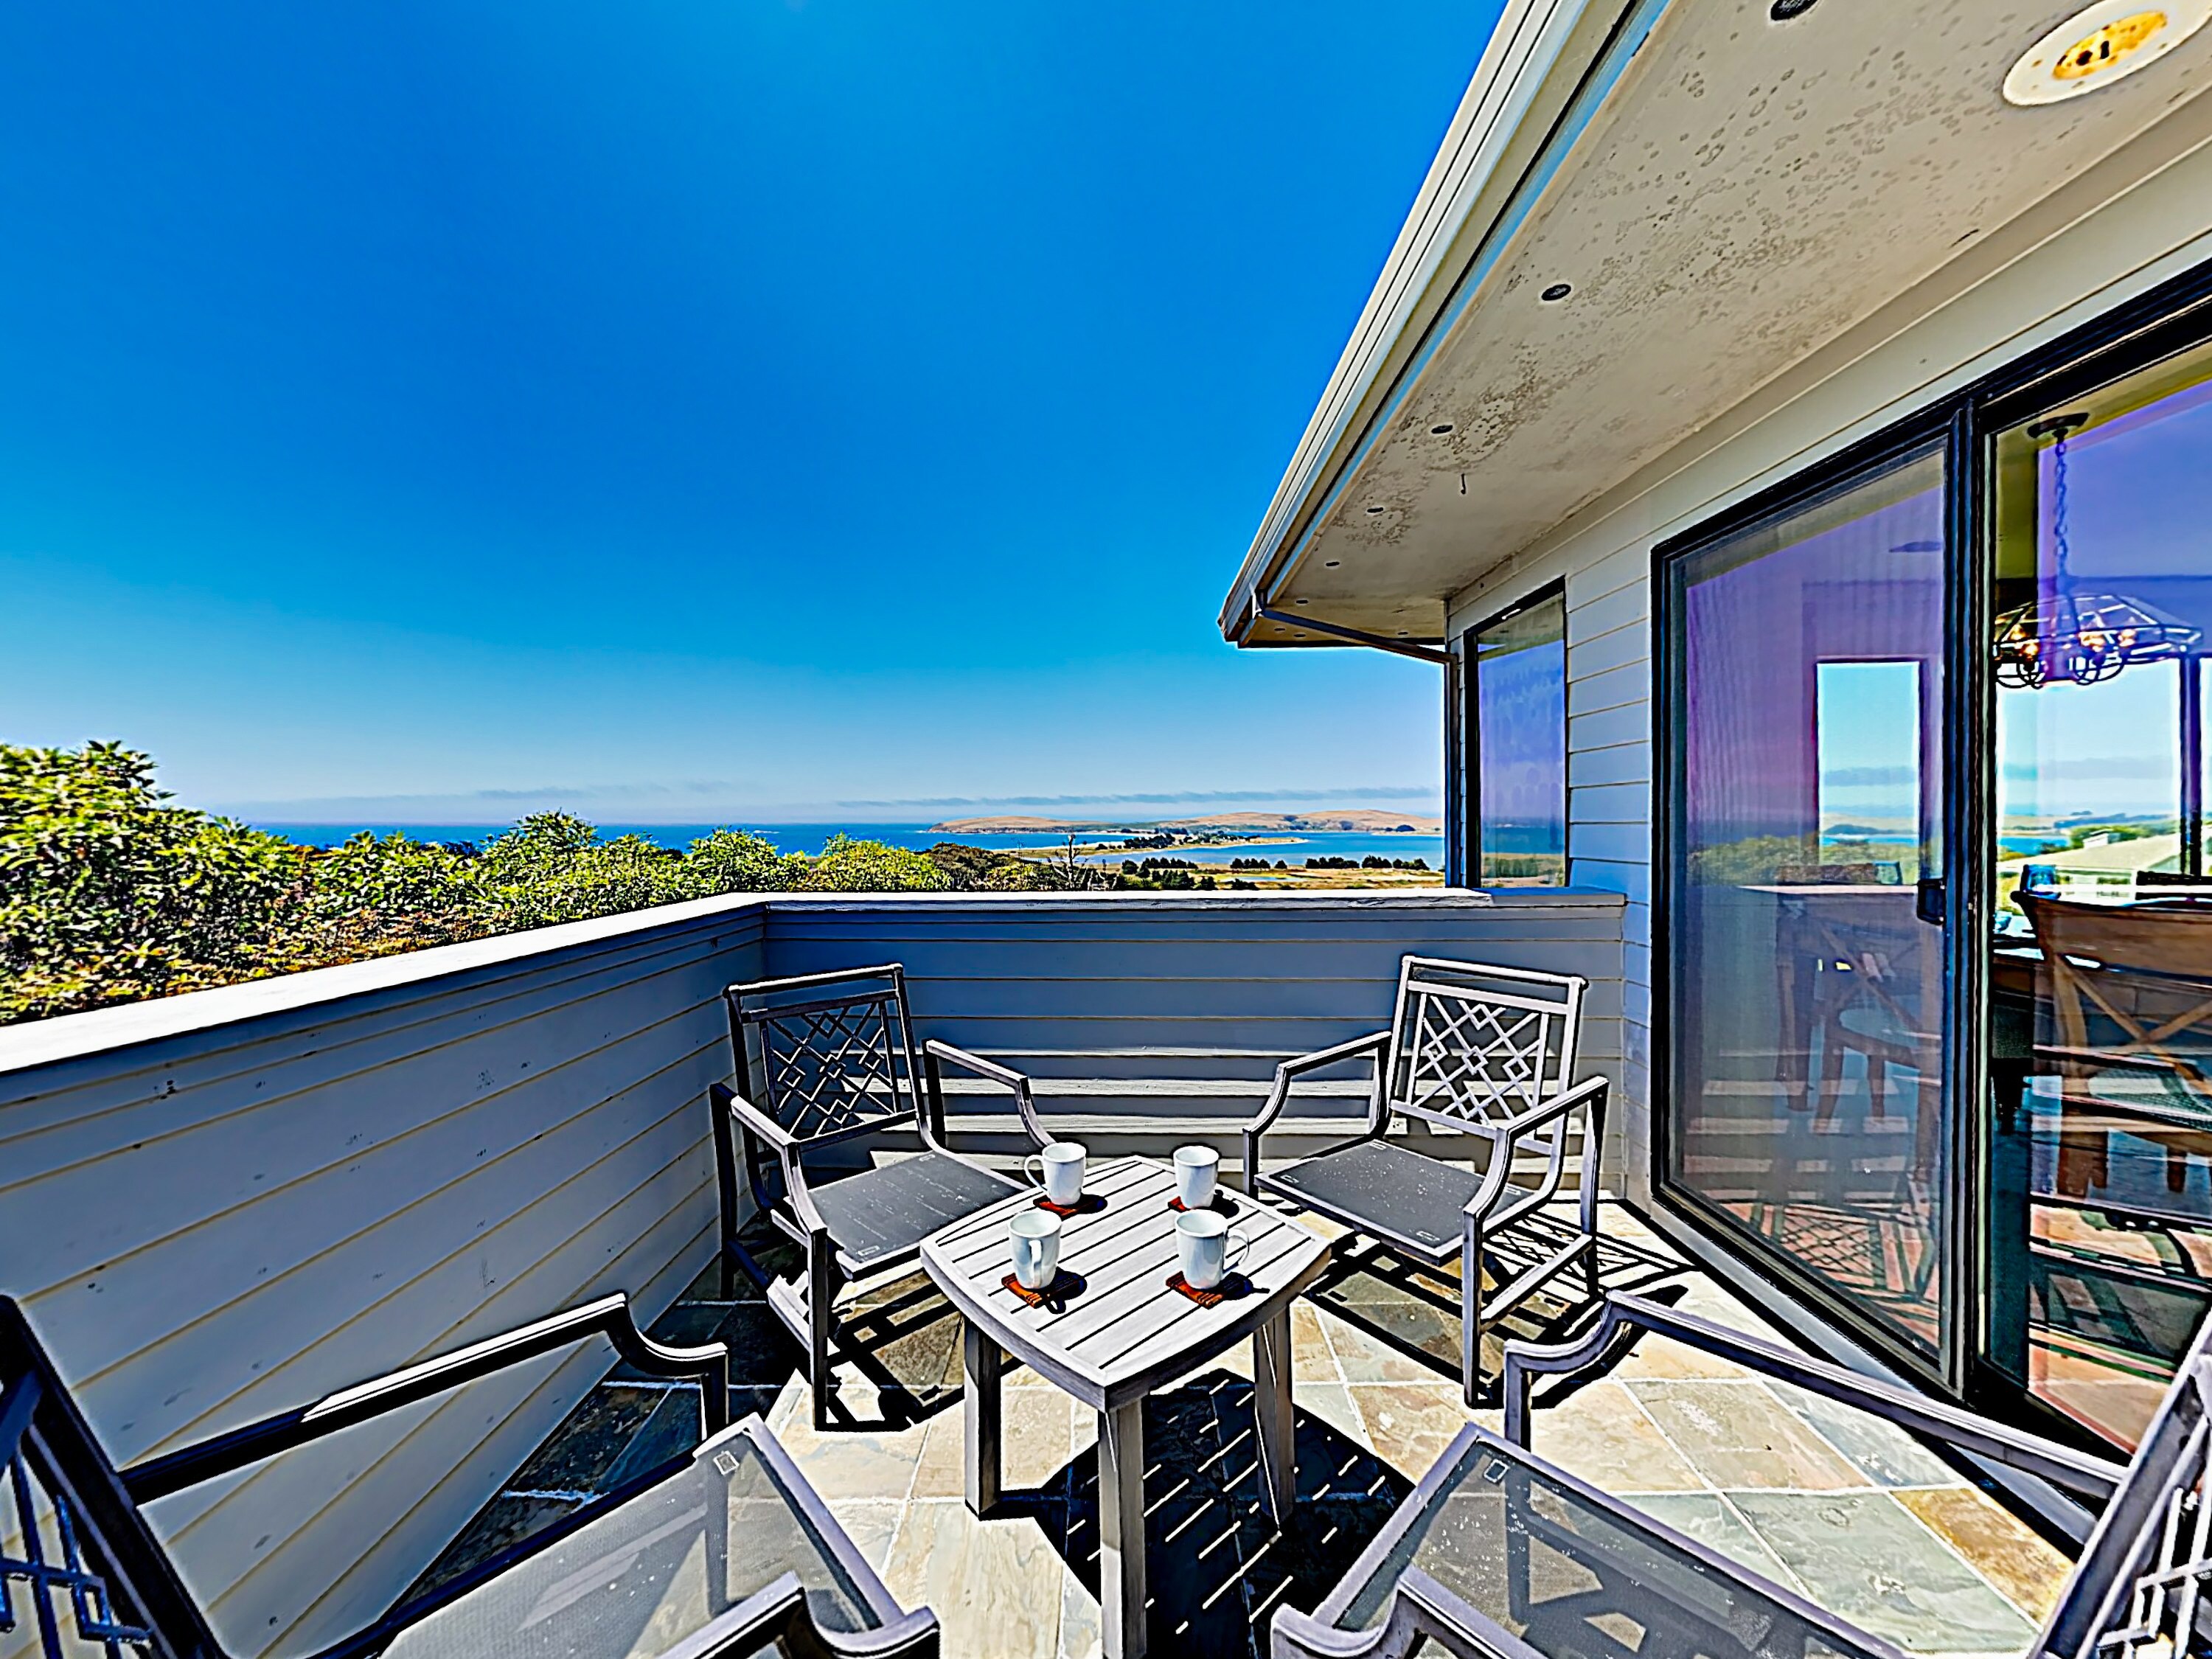 Ocean views and a refreshing breeze await on the balcony, where there’s seating for 4.